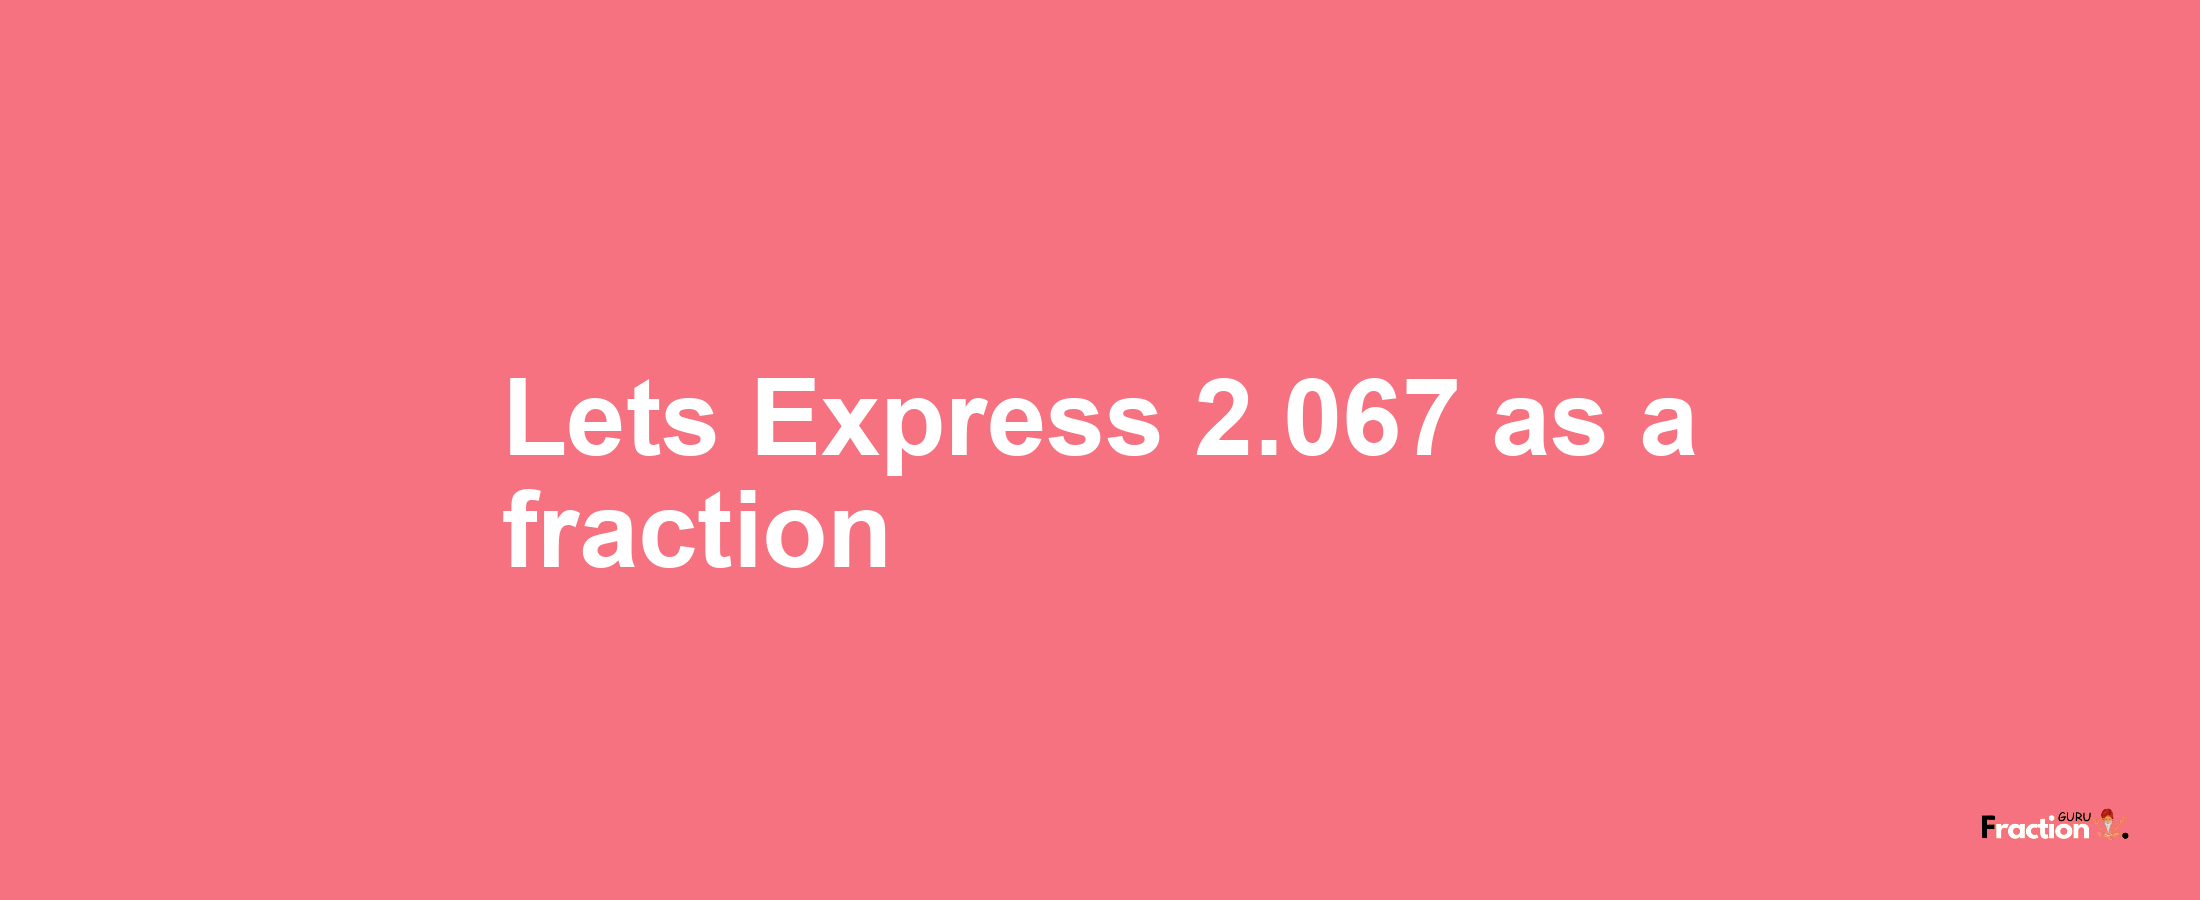 Lets Express 2.067 as afraction